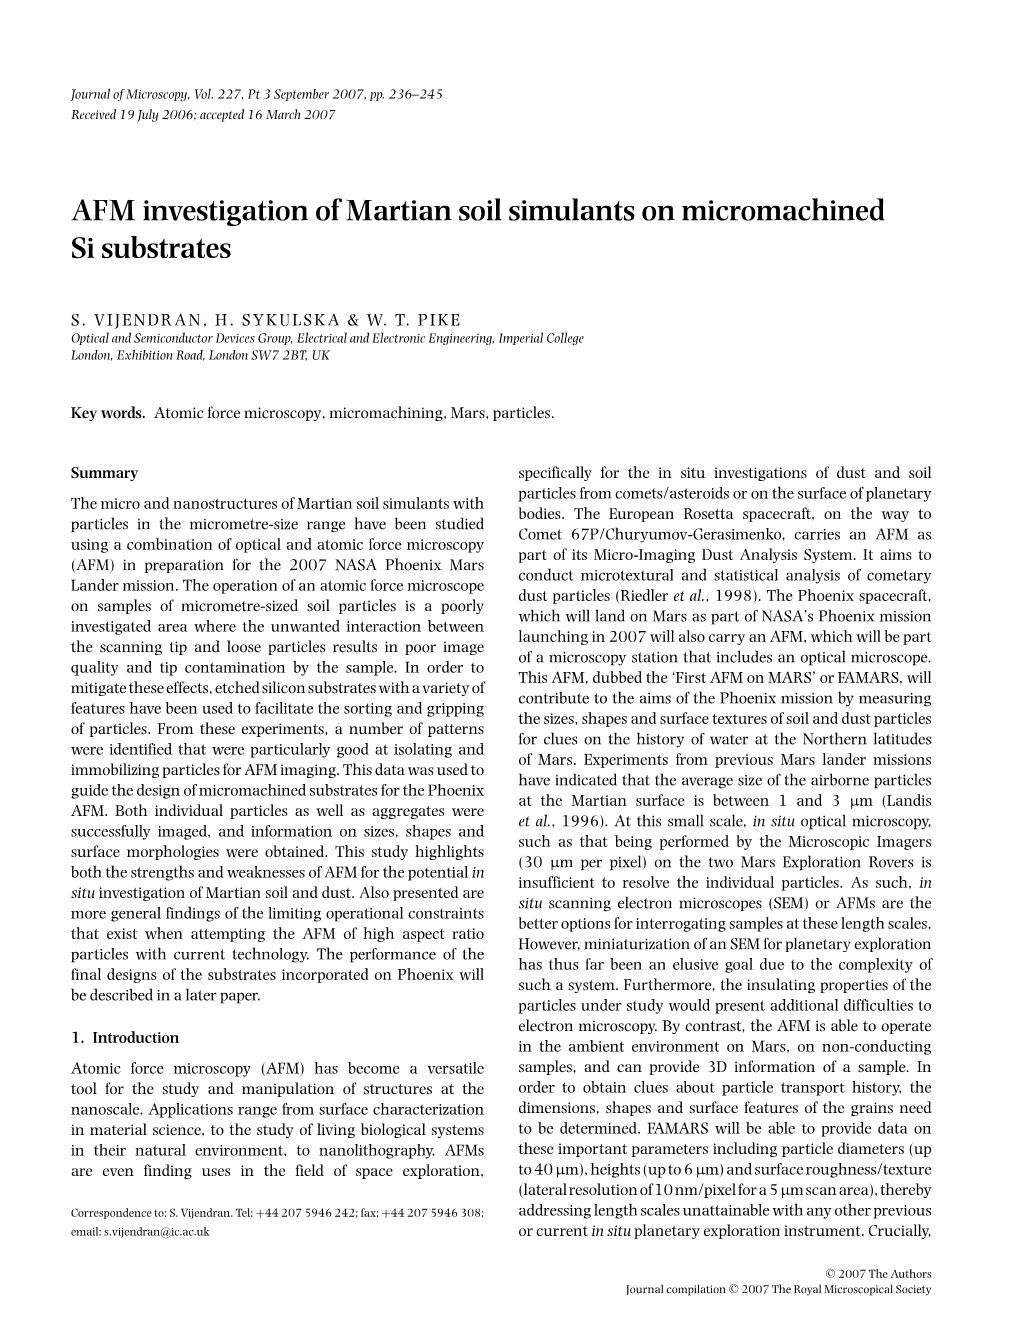 AFM Investigation of Martian Soil Simulants on Micromachined Si Substrates